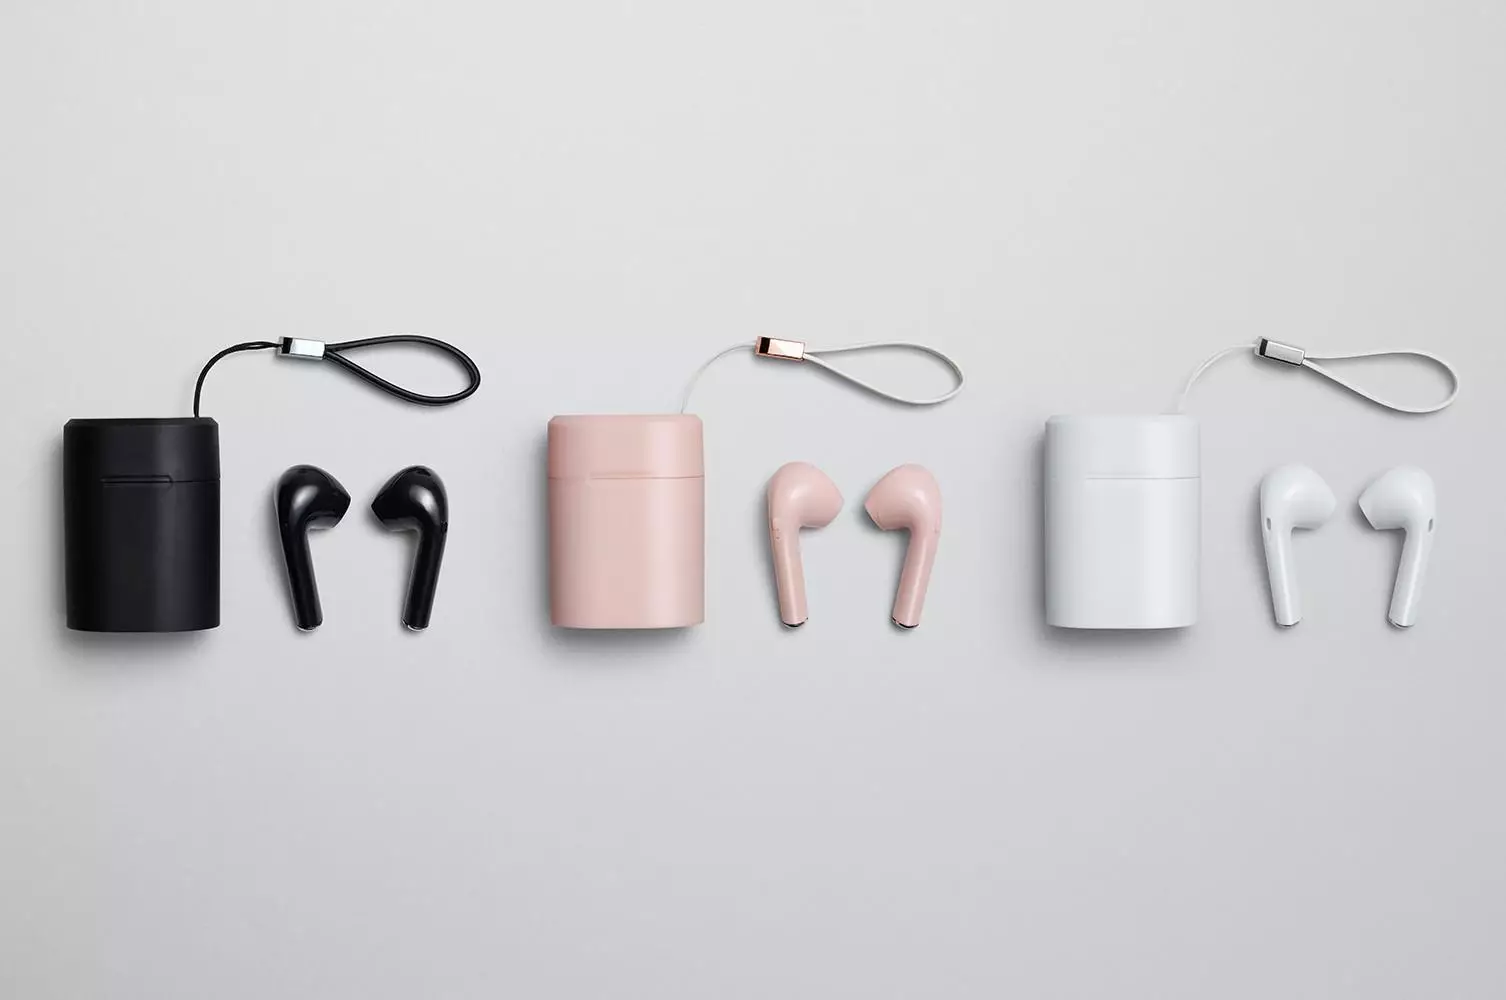 Primark's new bluetooth headphones look just like Apple's AirPods and are a fraction of the price.